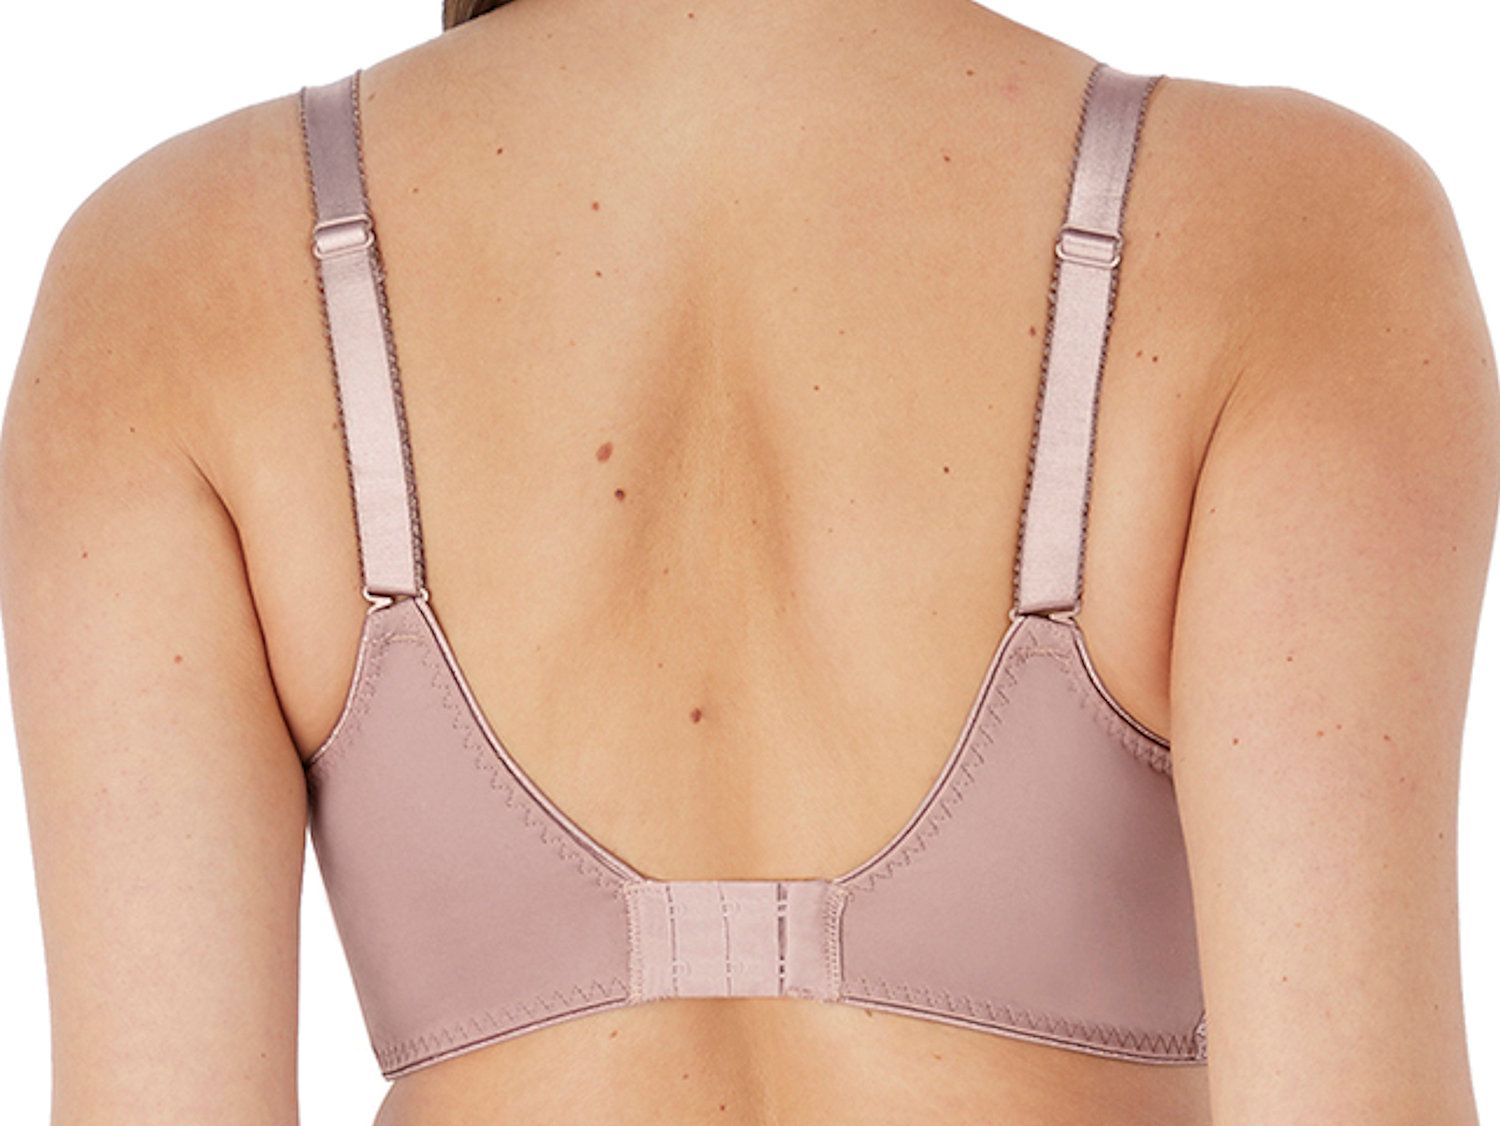 Envisage Natural Beige Full Cup Side Support Bra from Fantasie